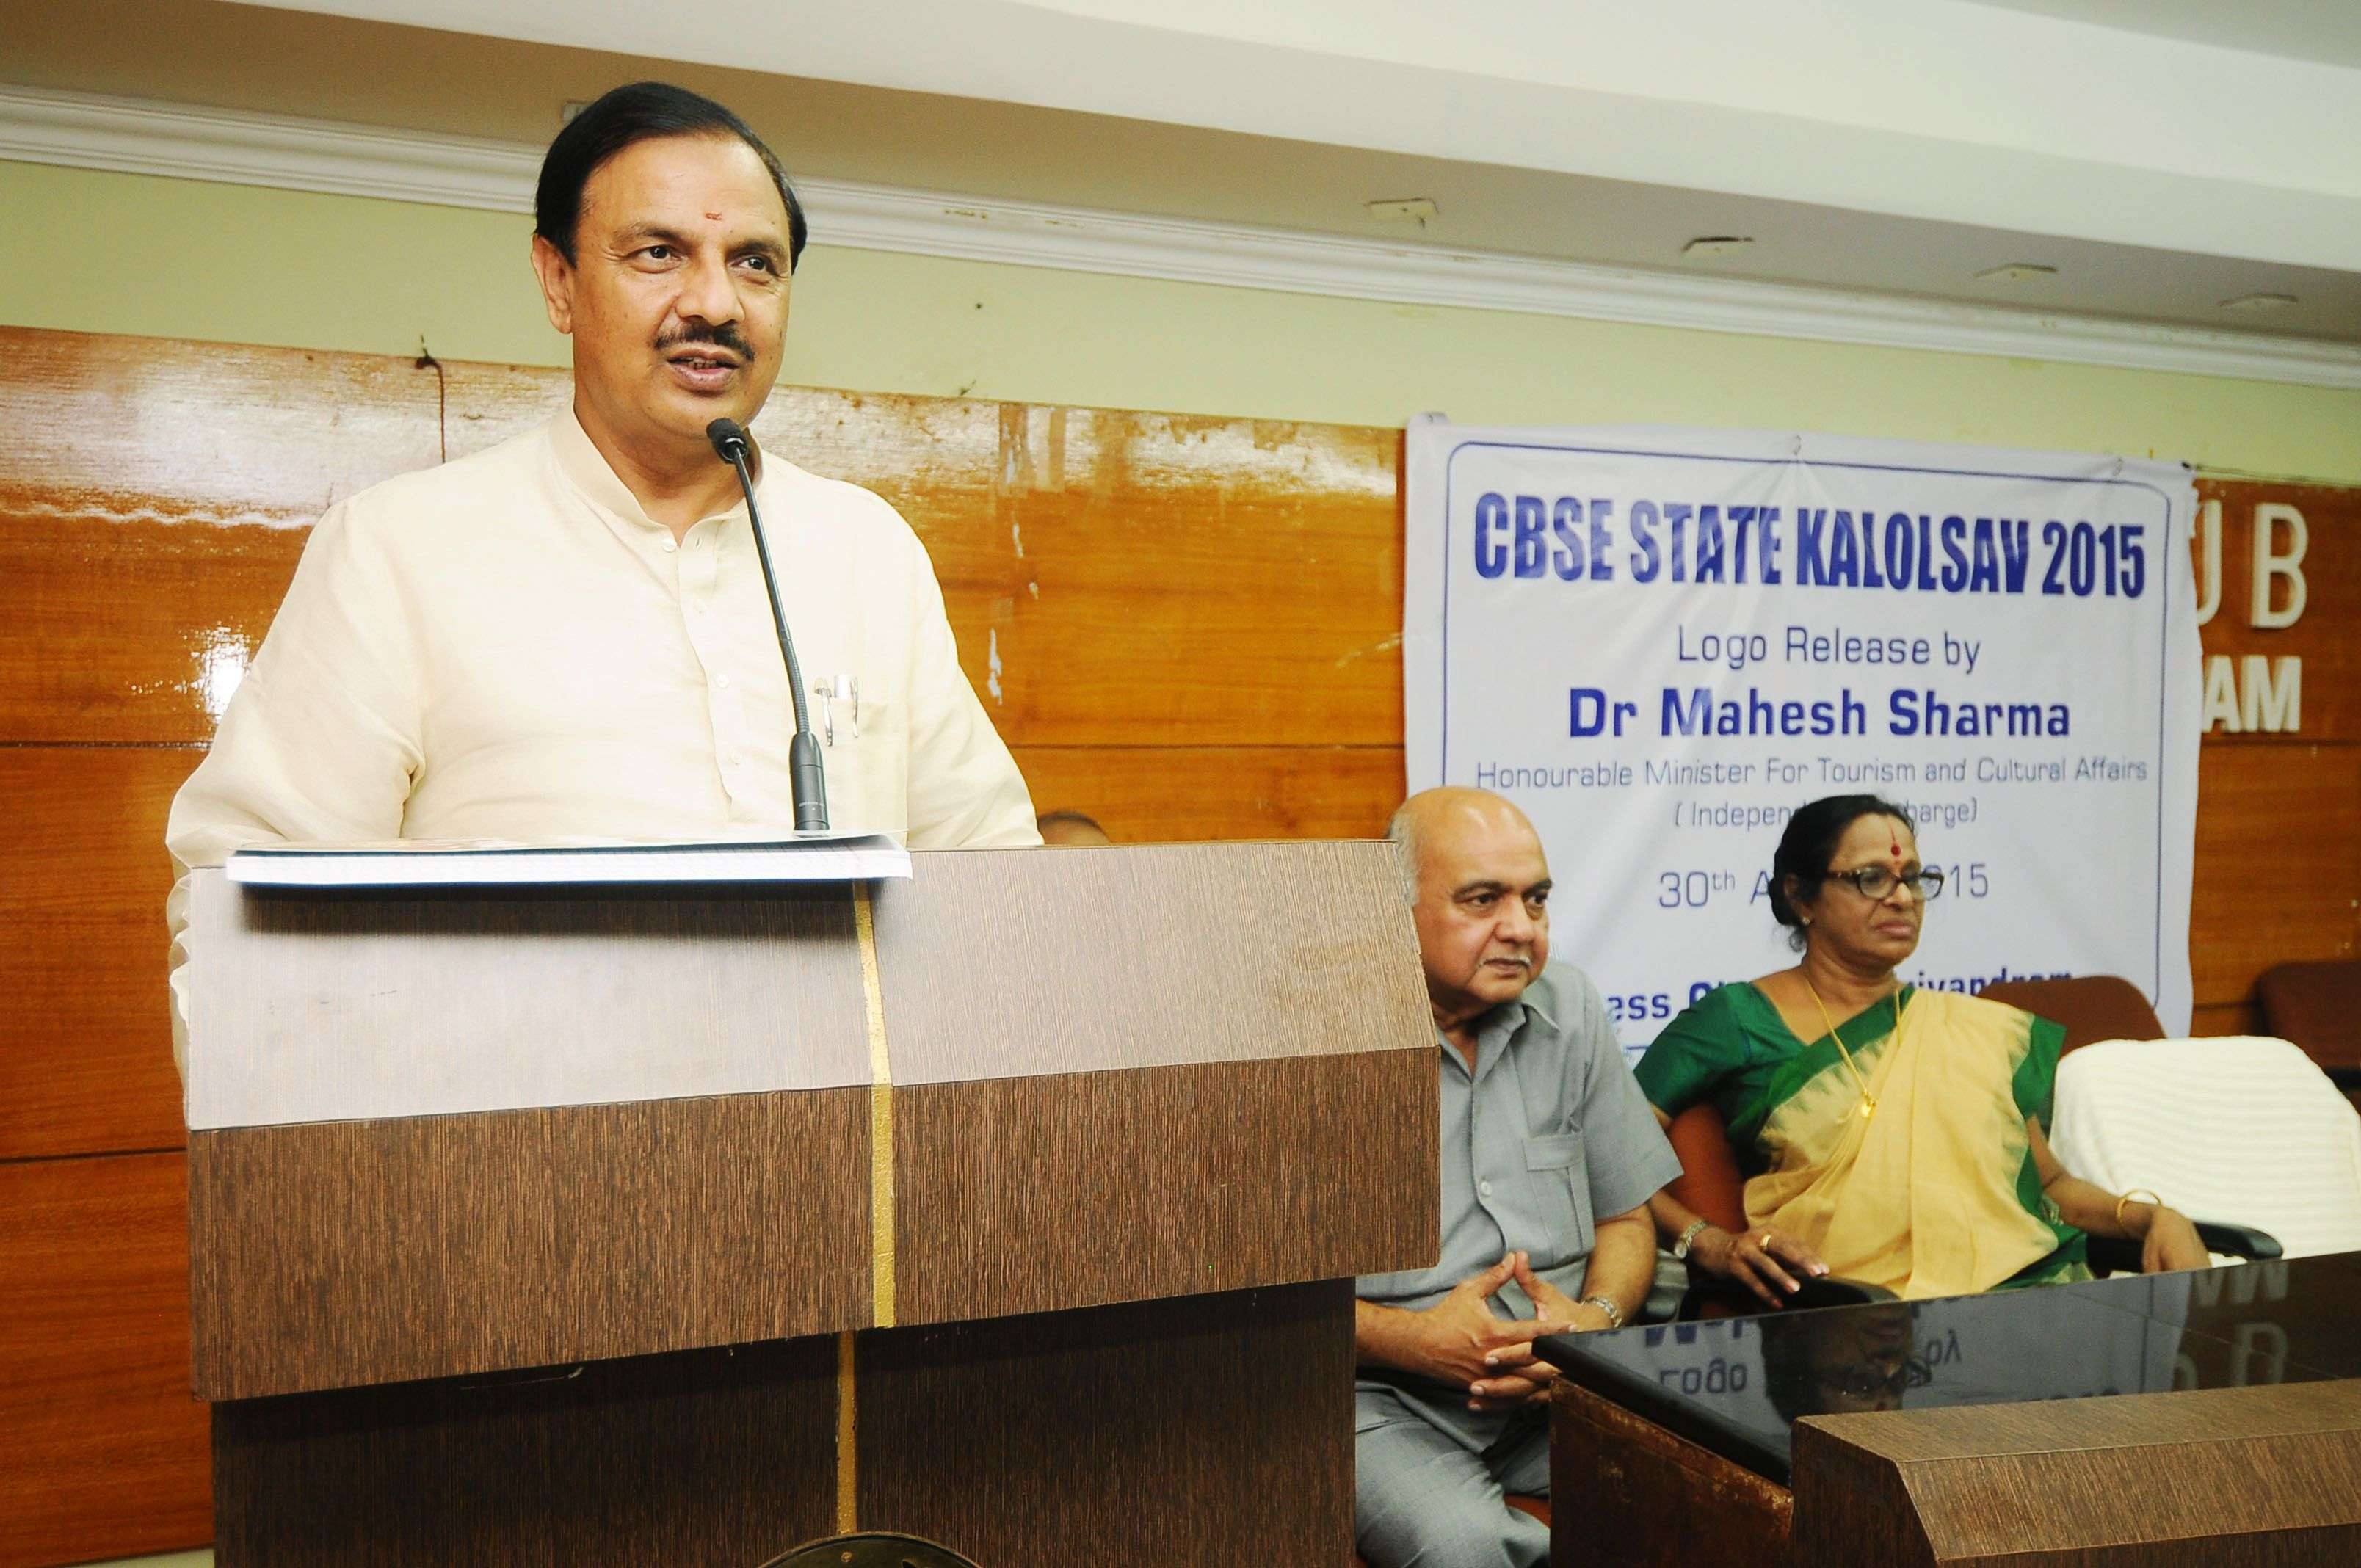 Union Minister for Culture Mahesh Sharma addressing the gathering after launching the logo for CBSE State Kalolsav 2015, at Trivandrum Press Club in Thiruvananthapuram on Sunday